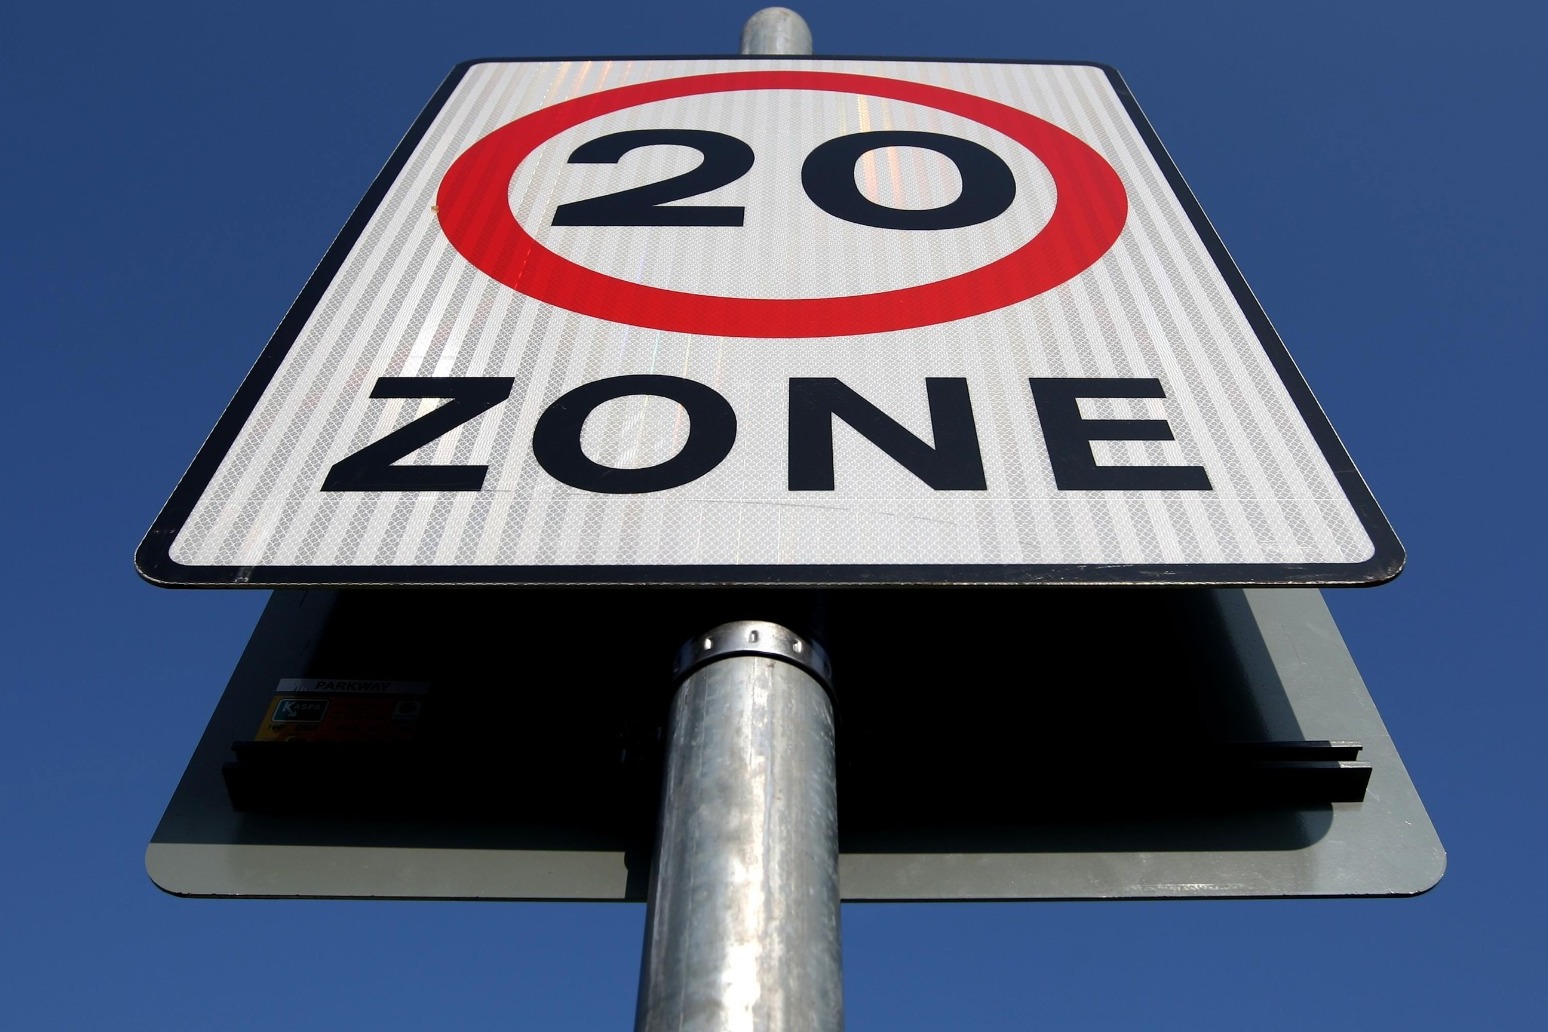 Wales 20mph guidance to be \'corrected\'